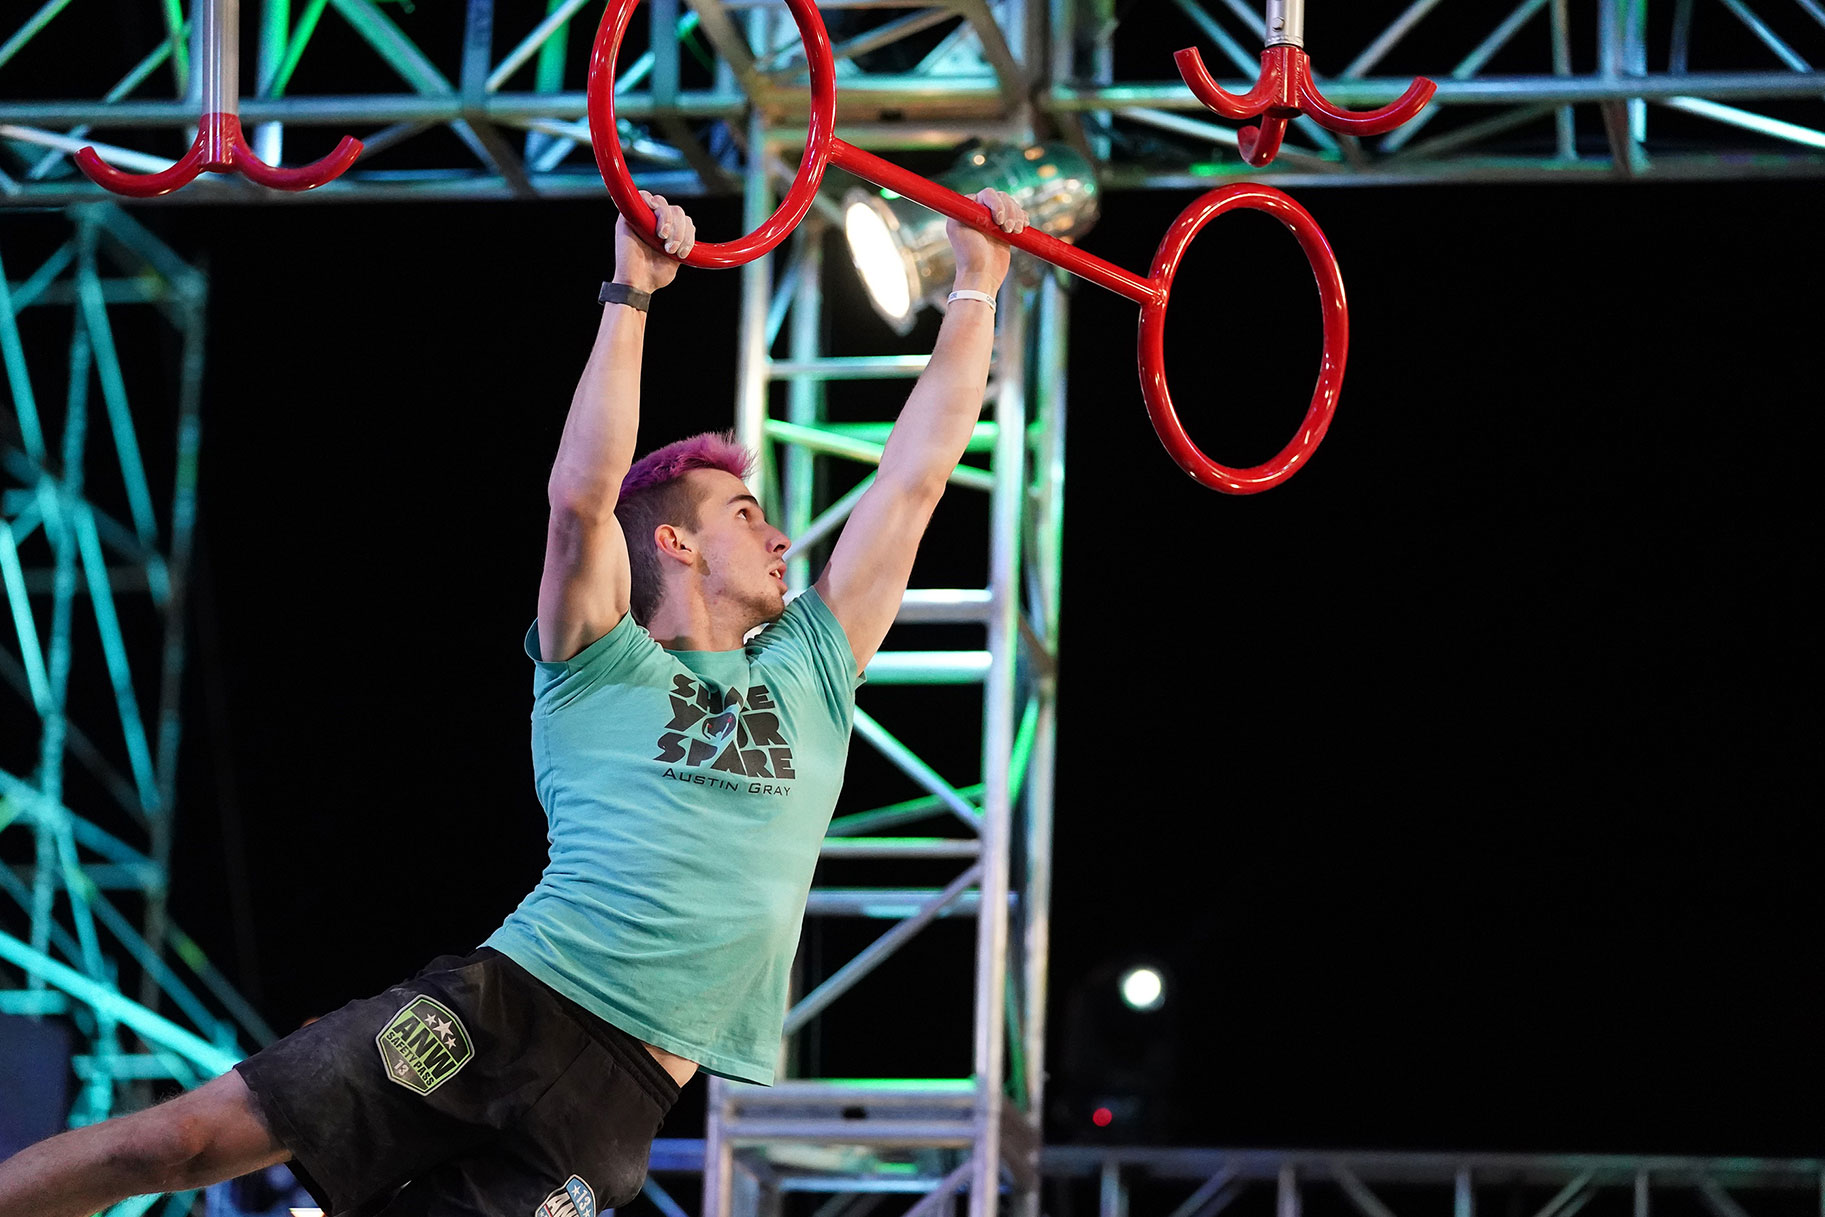 Contestant swnging on a ninja warrior obstacle